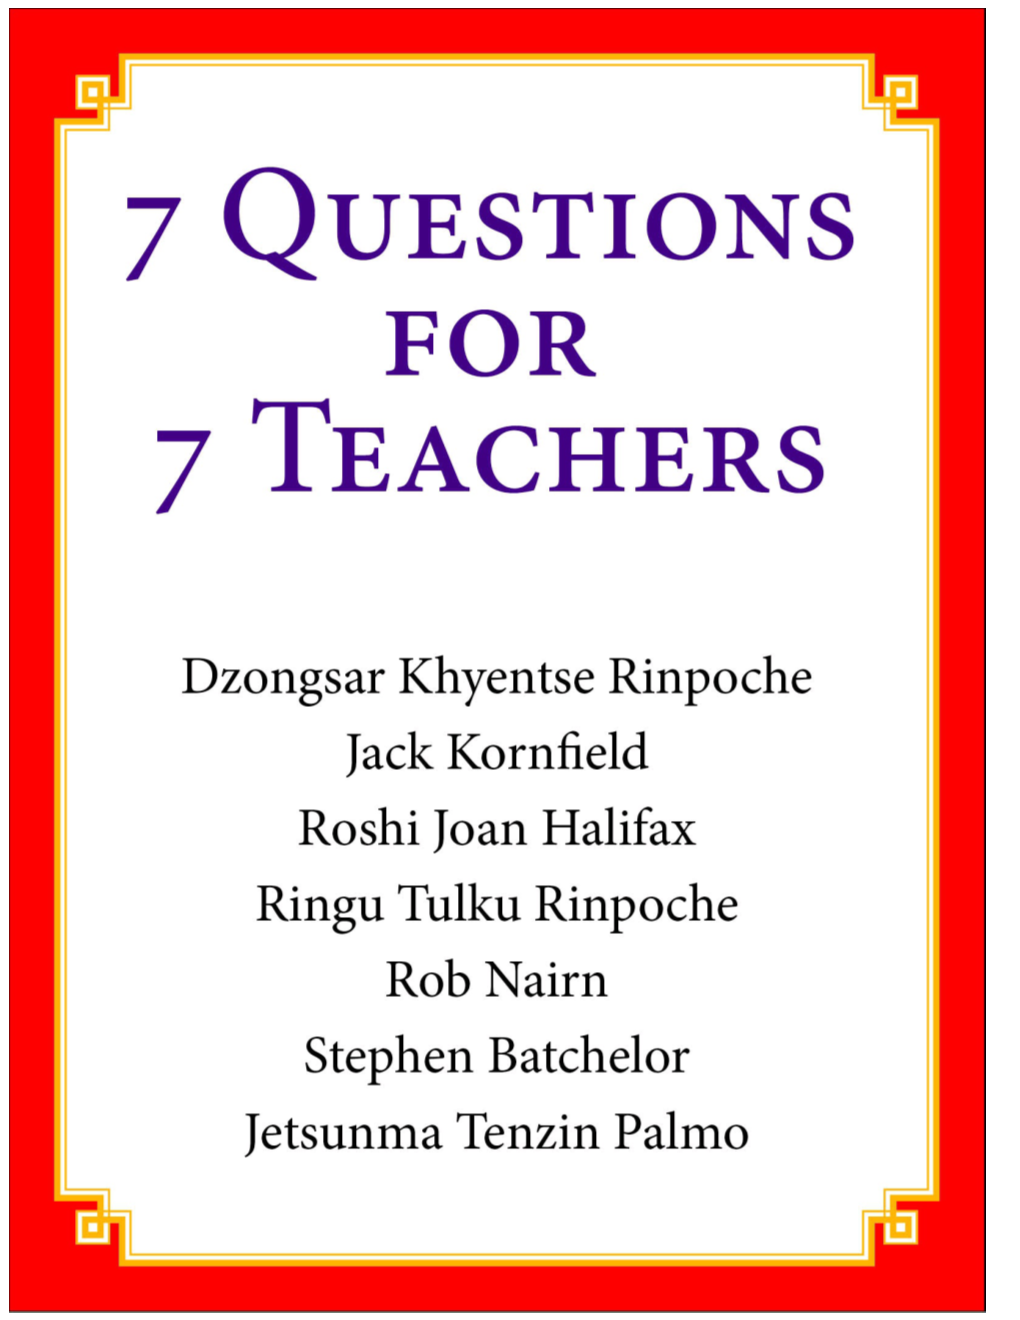 7 Questions for 7 Teachers